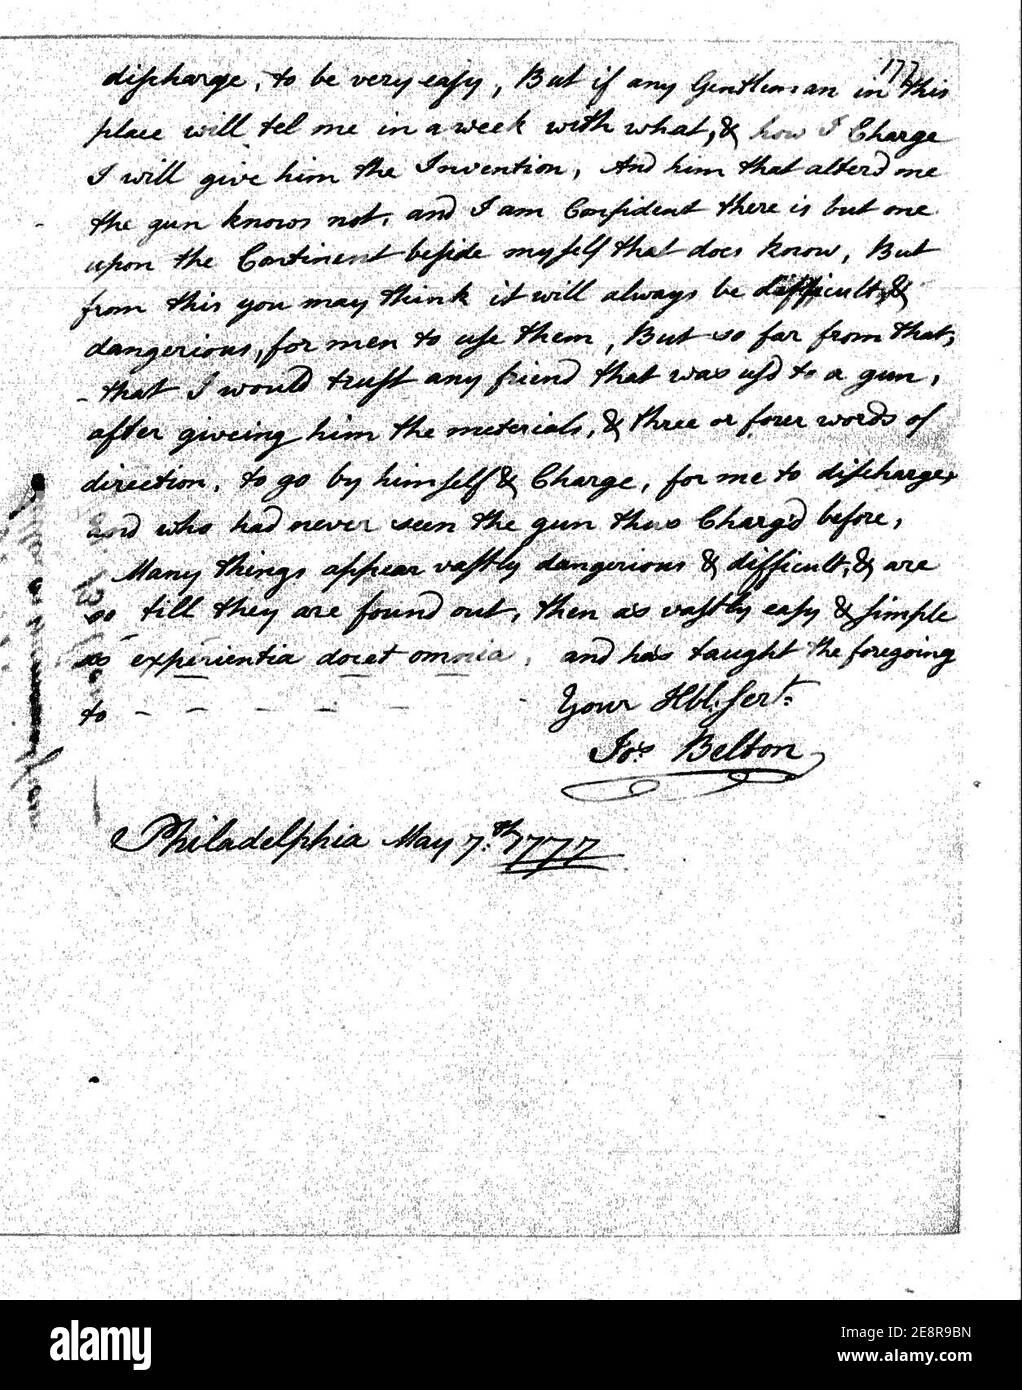 Misc Ltrs to Congress 1775-89 B, 1775-80 (Vol 2) Page 177 enhanced. Stock Photo